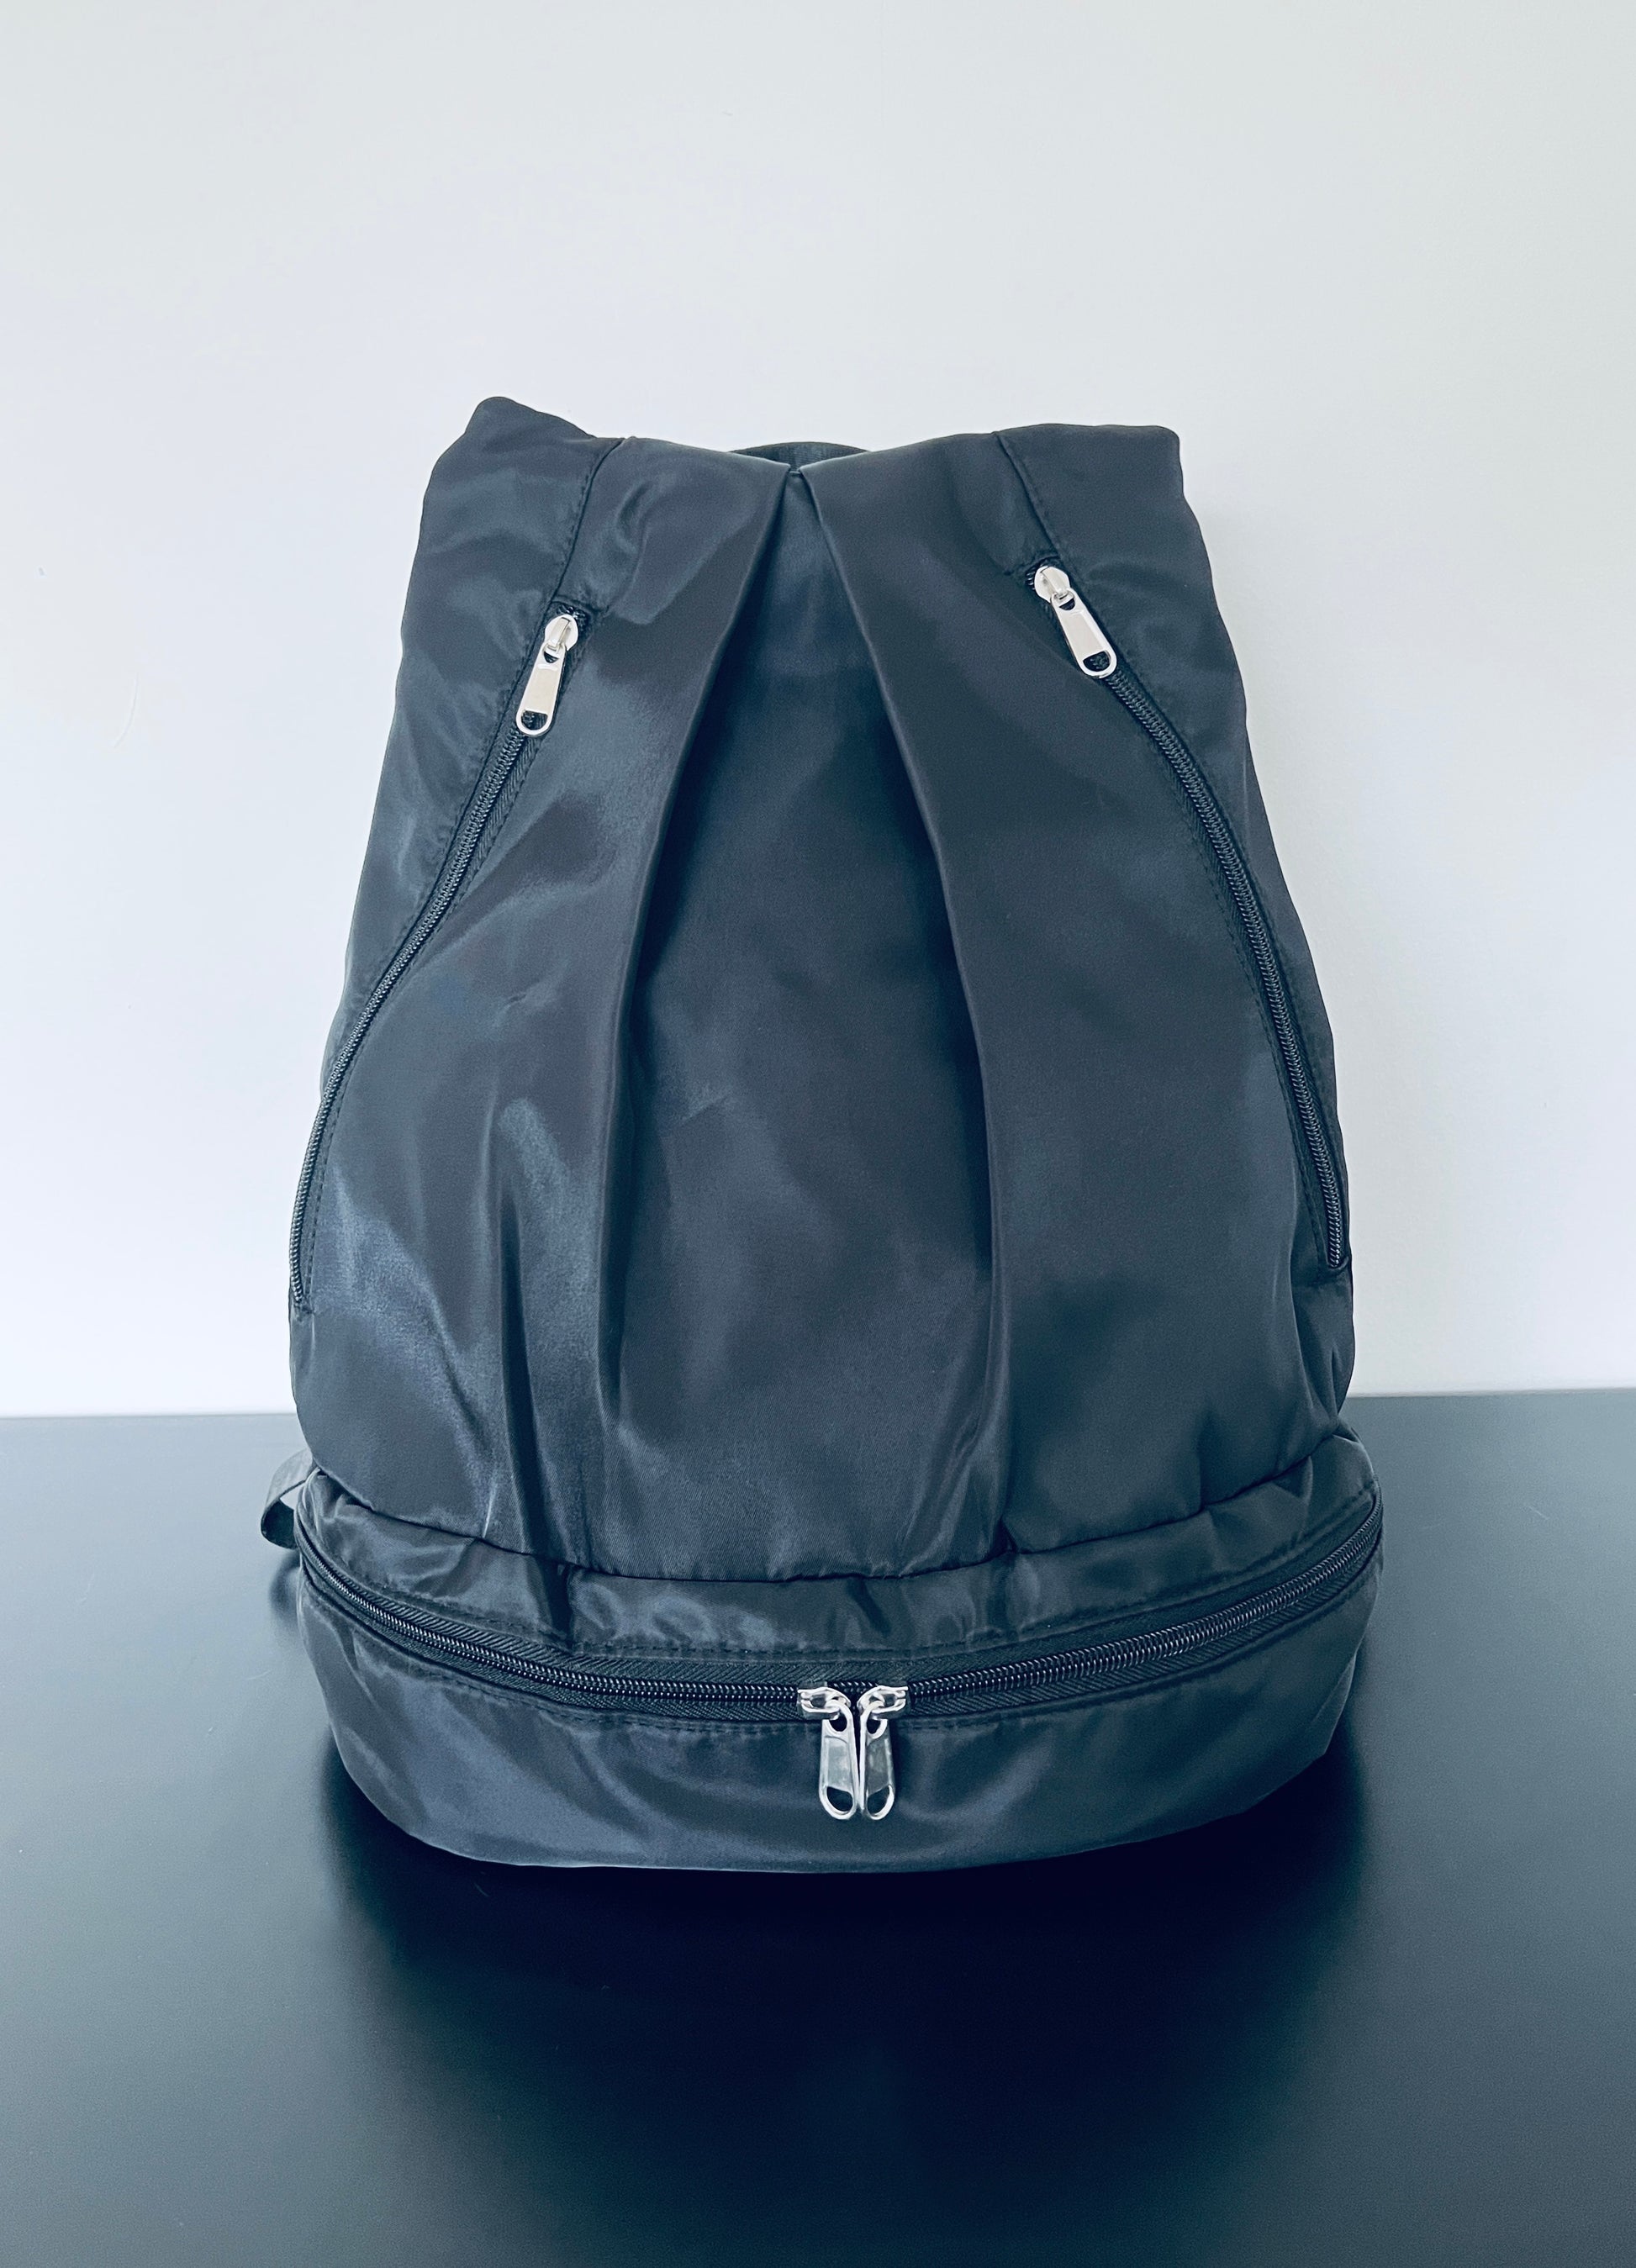 Dance back pack for ballet from The Collective Dancewear 